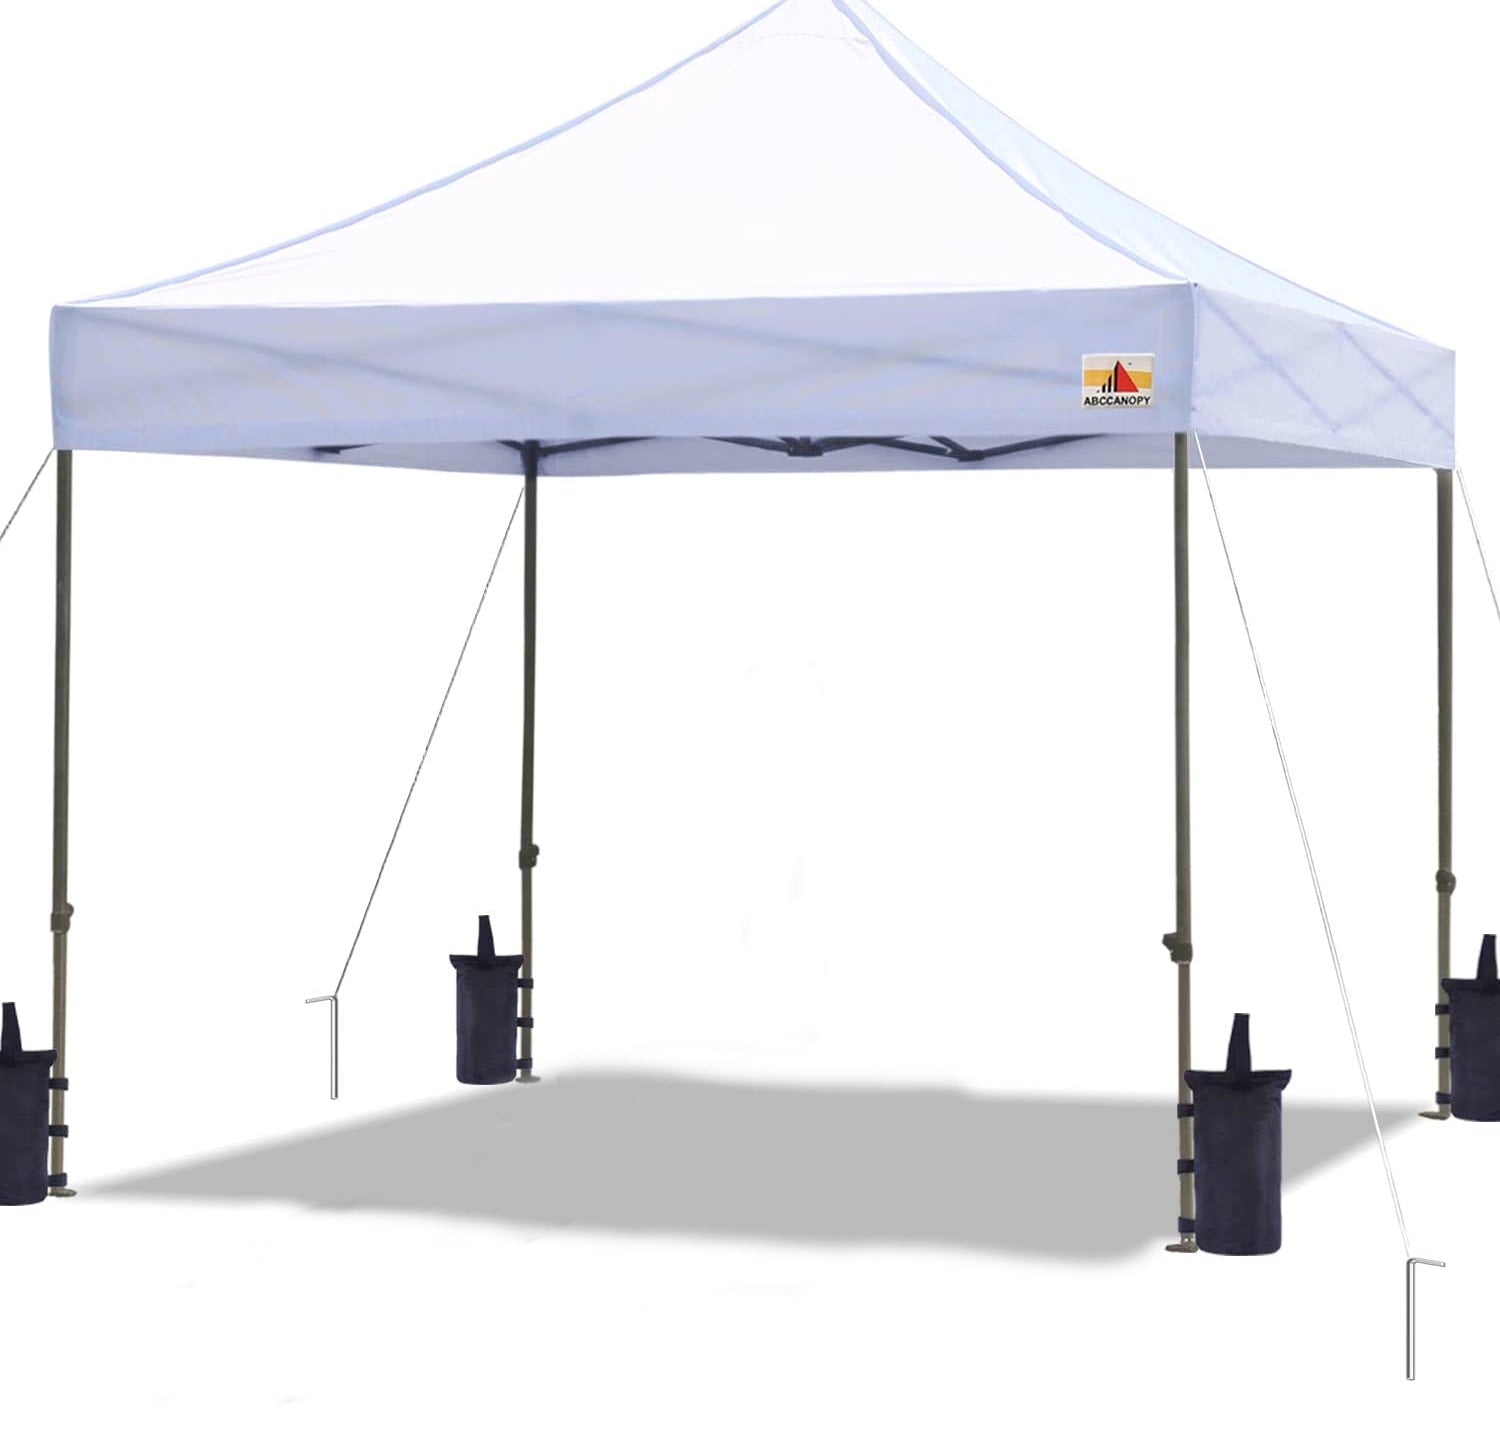 ABCCANOPY Model S1 Commercial-Series canopy with a dark gray frame and a white canopy top. The canopy is supported by four legs equipped with sand-fillable weights.